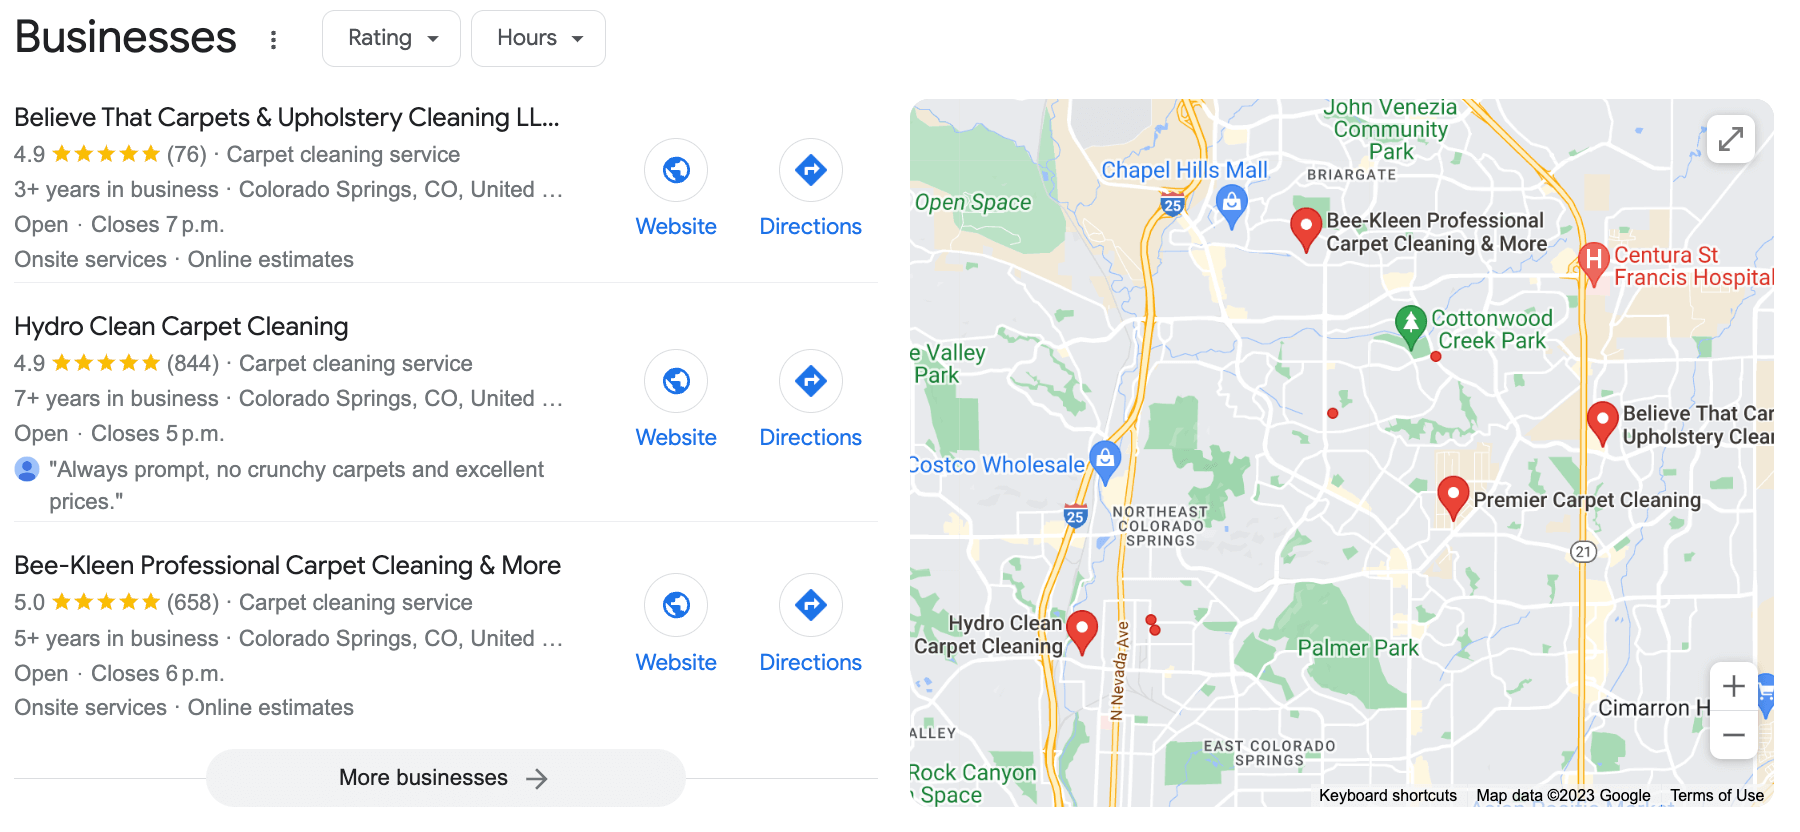 Example of optimized Google Business Profile examples for local carpet cleaning businesses in Colorado.